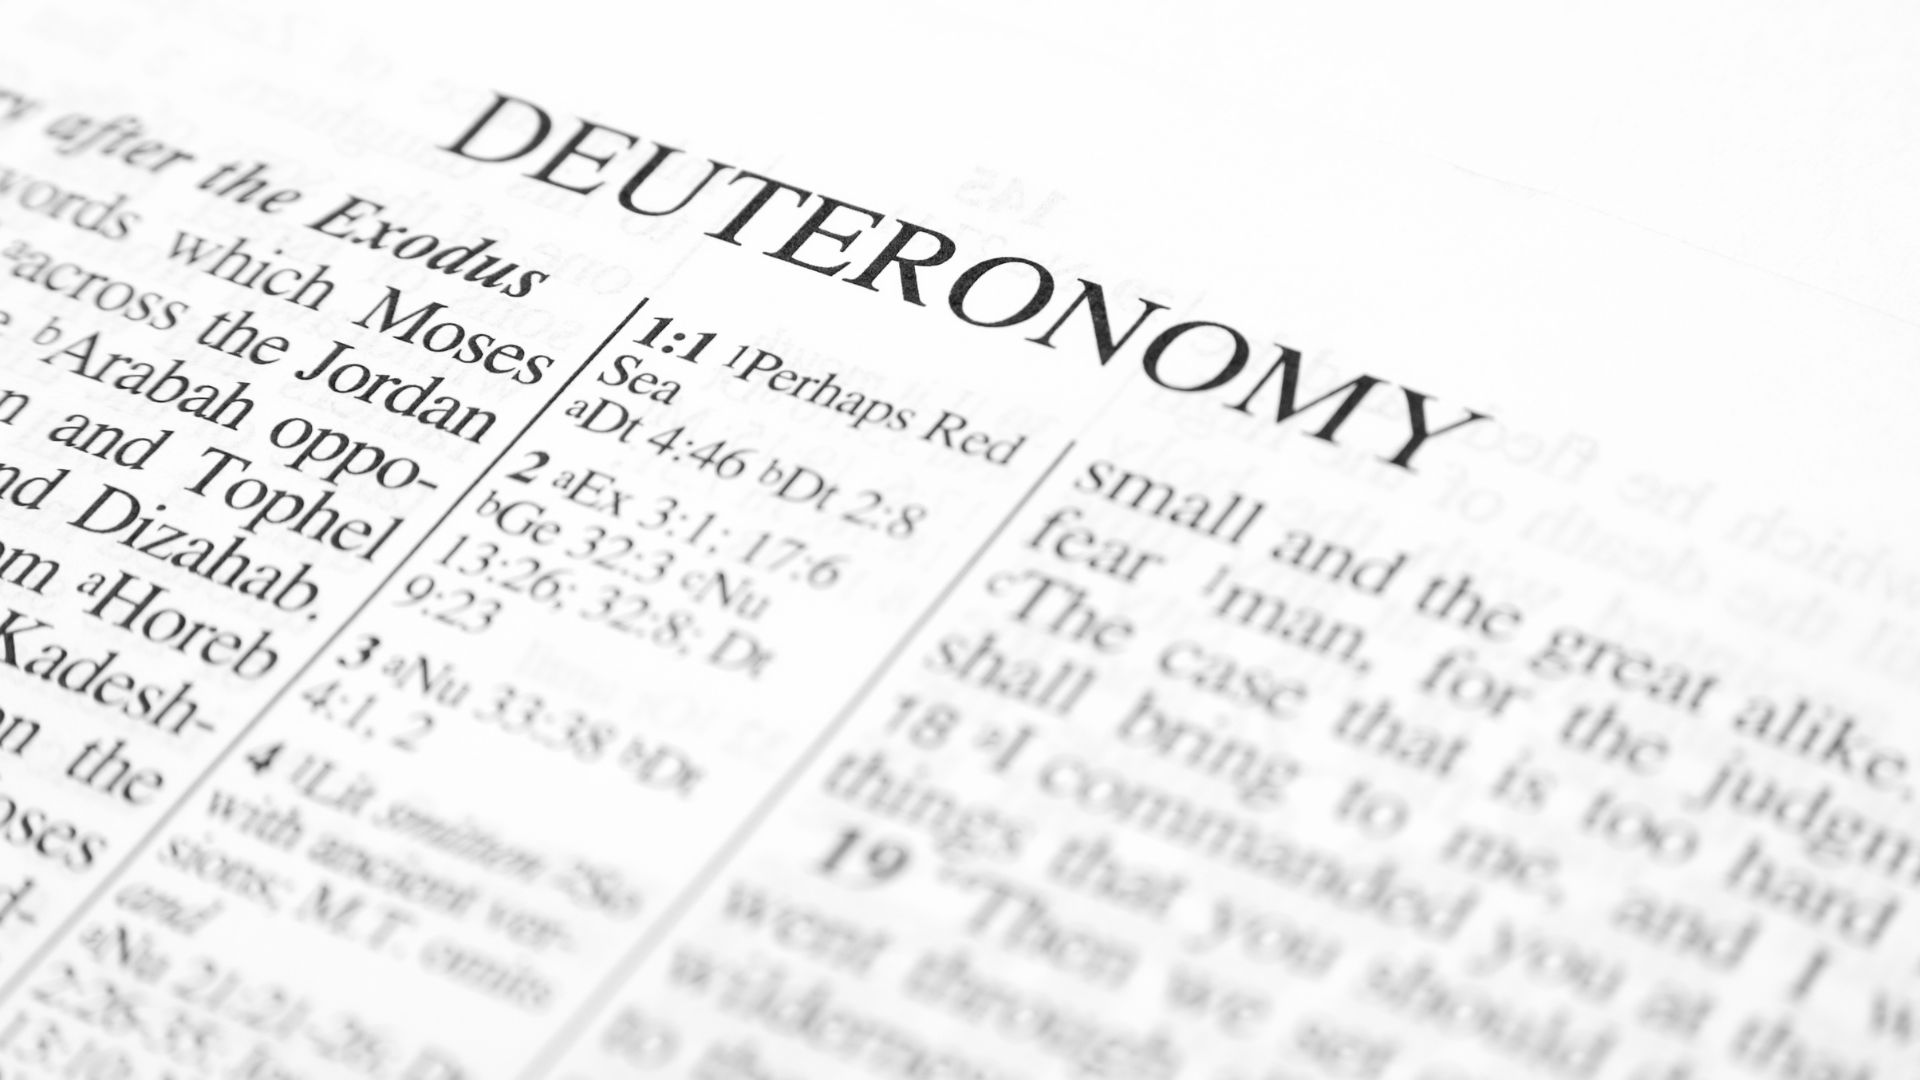 Deuteronomy: Israel's Covenant with the Great King